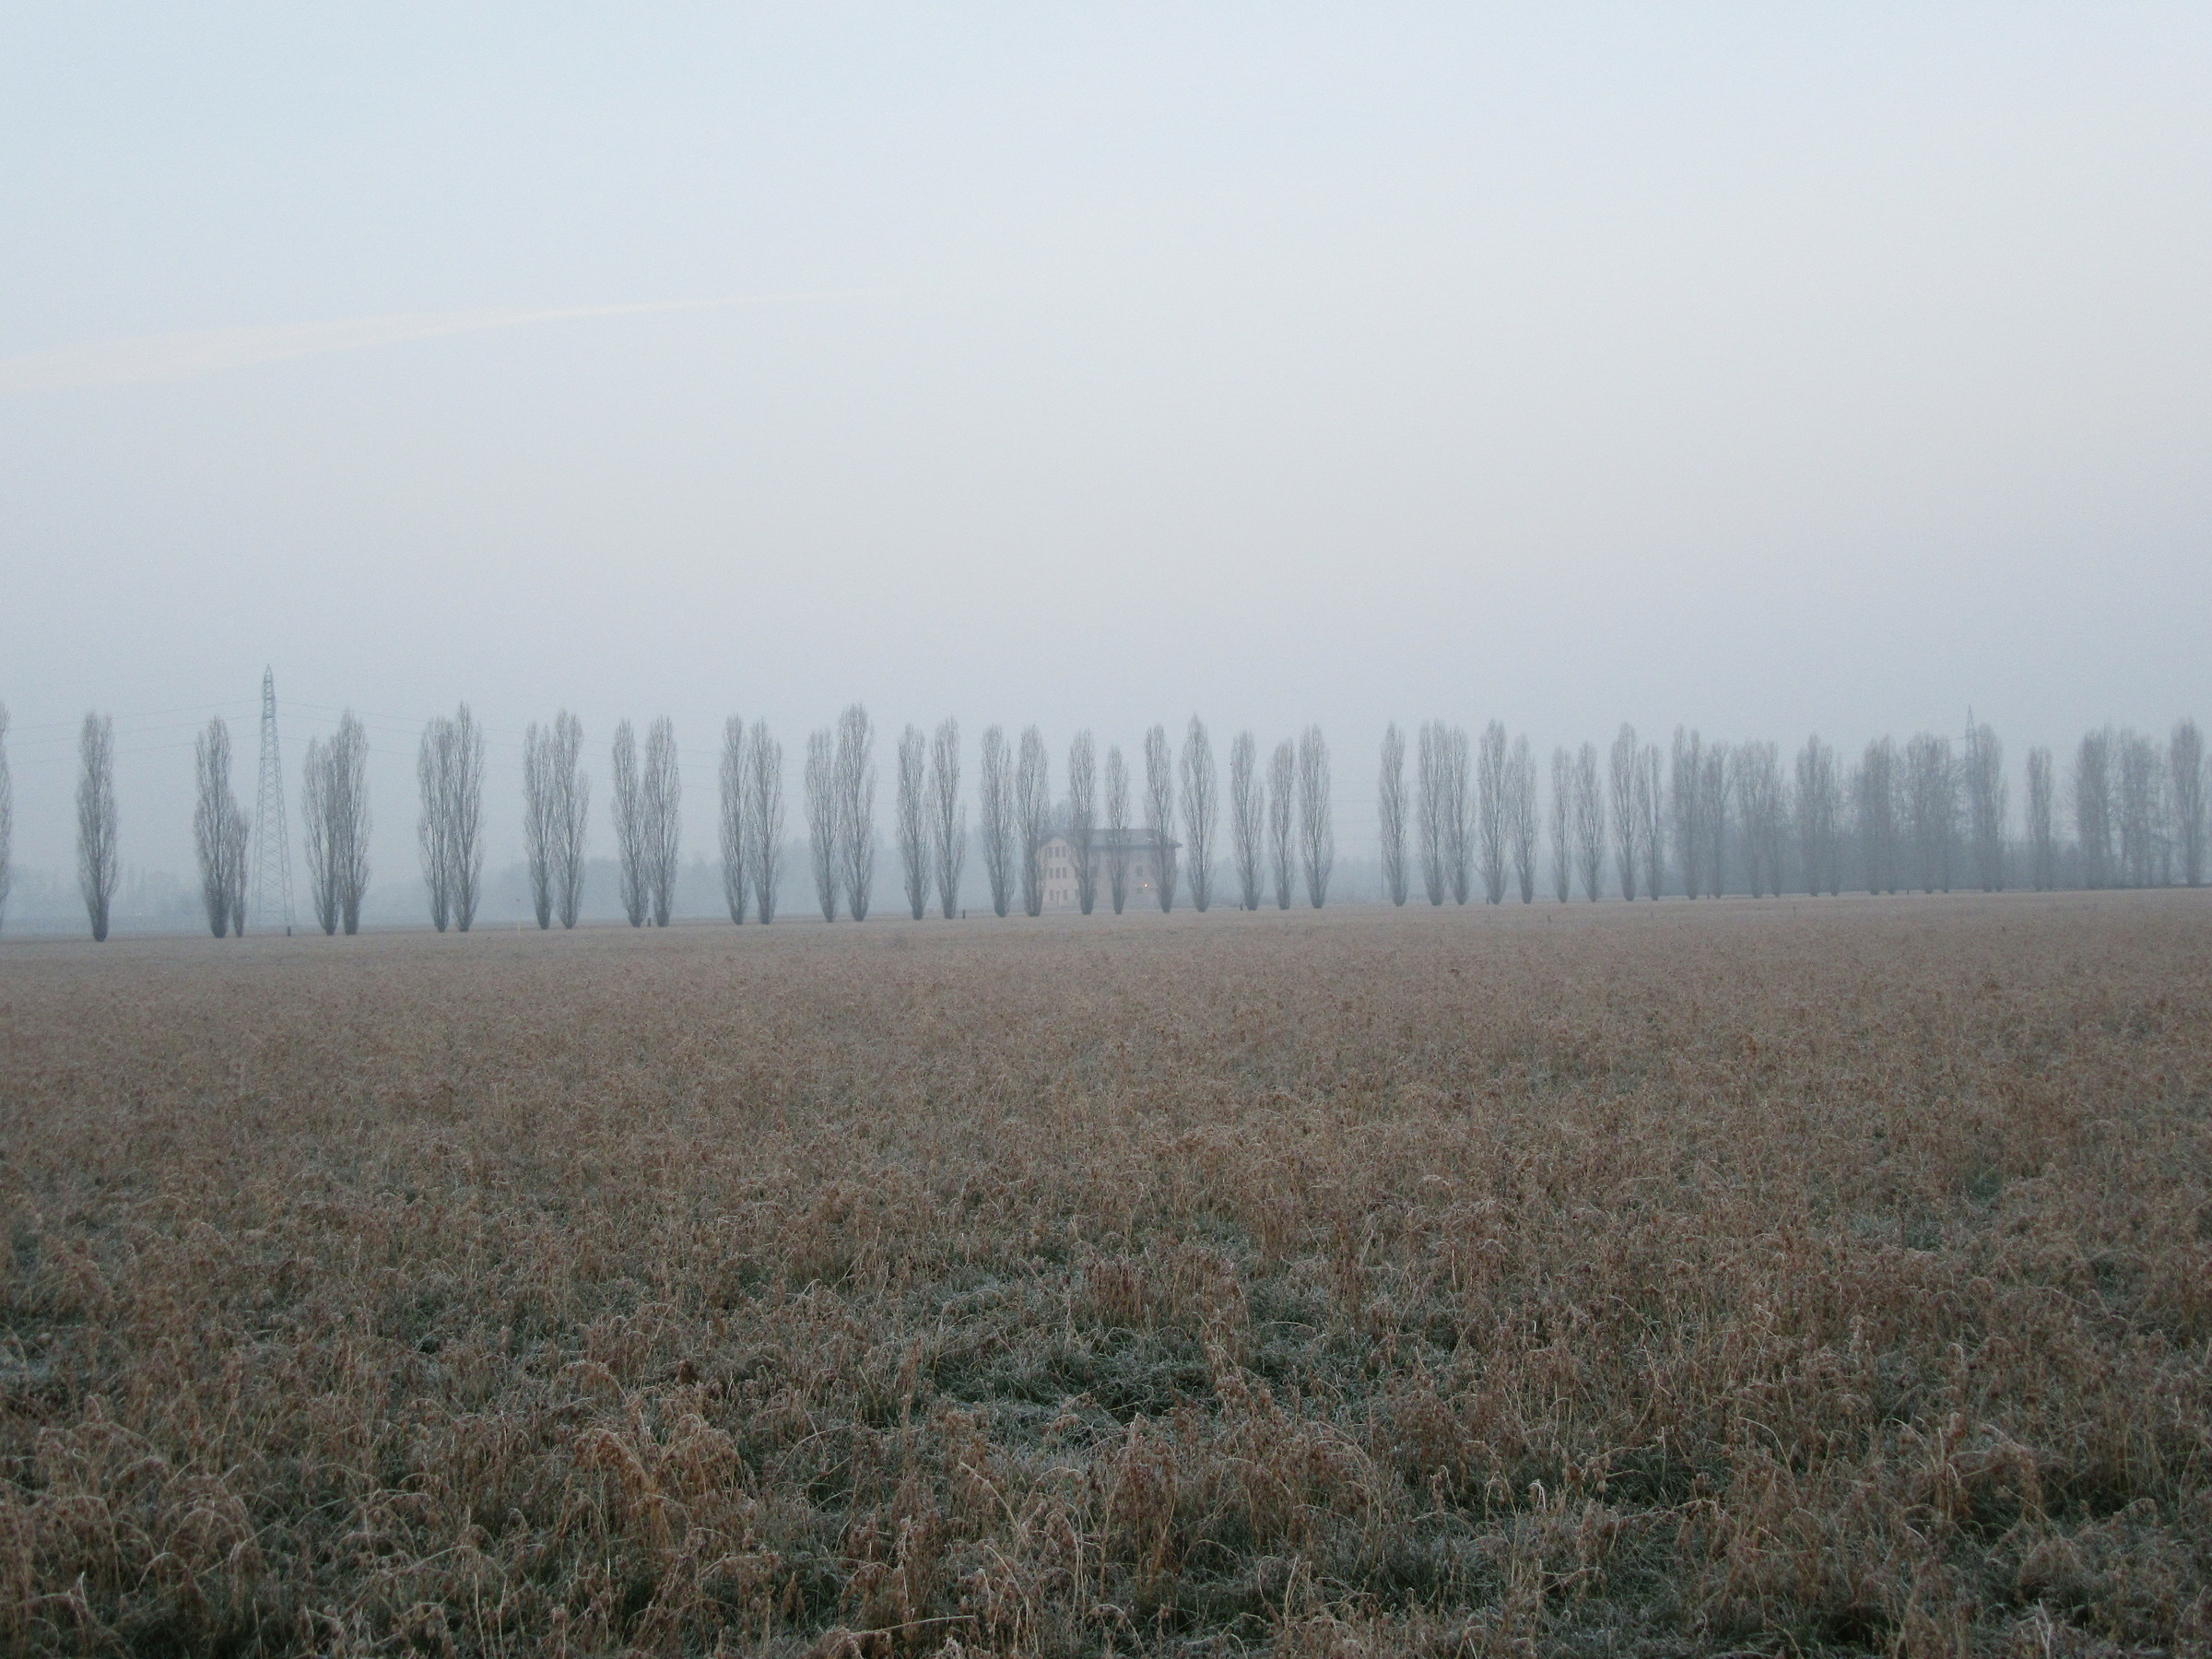 Touring the countryside of Modena, at 8 am...